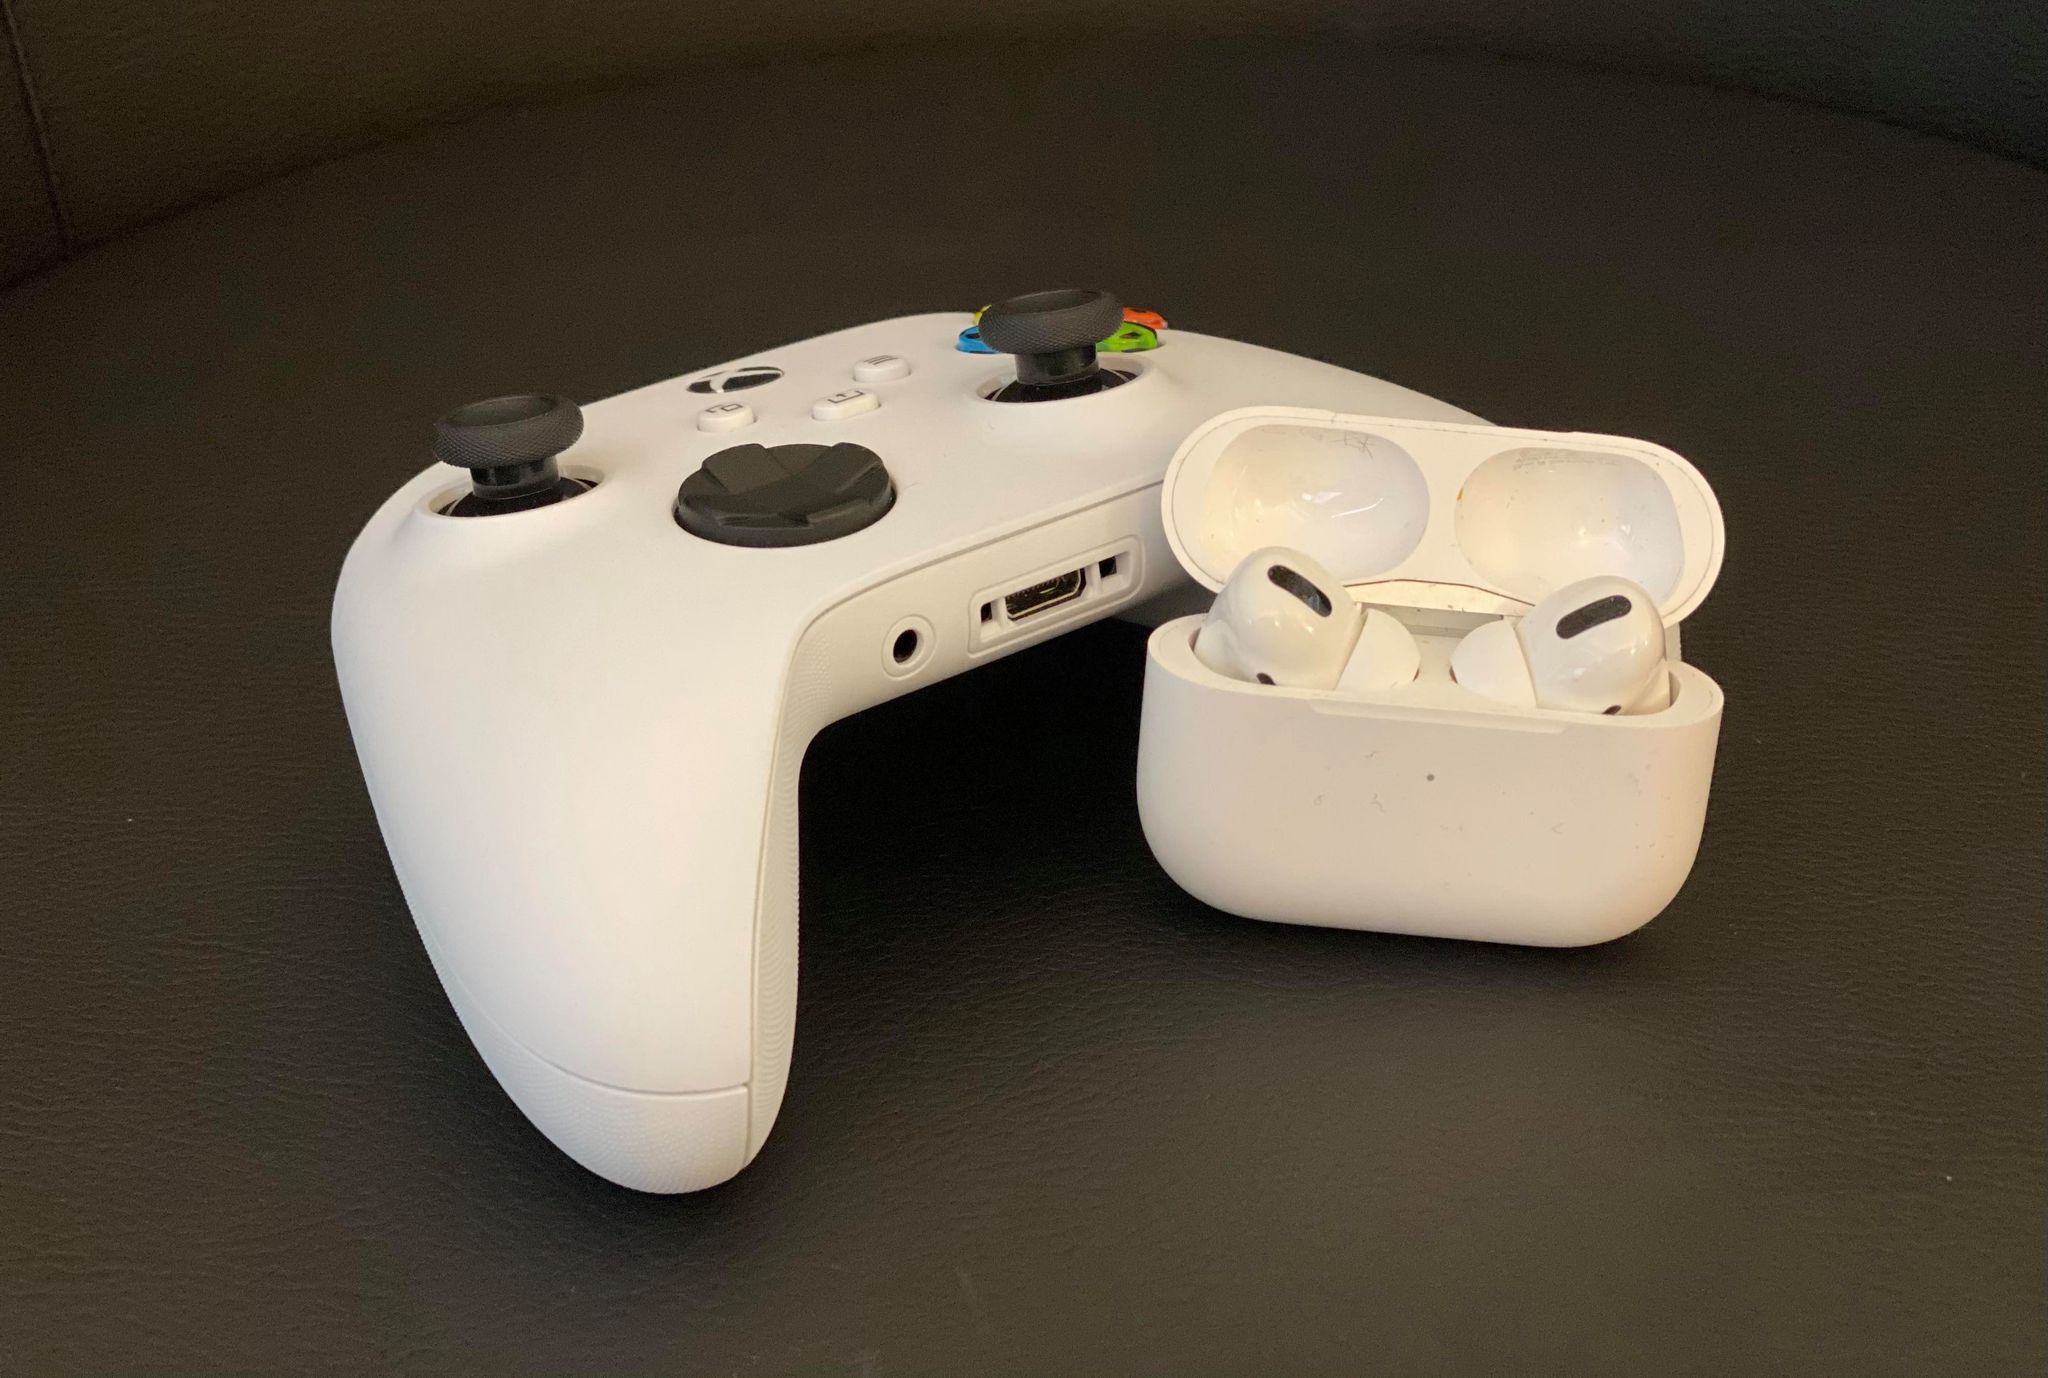 xbox to airpods